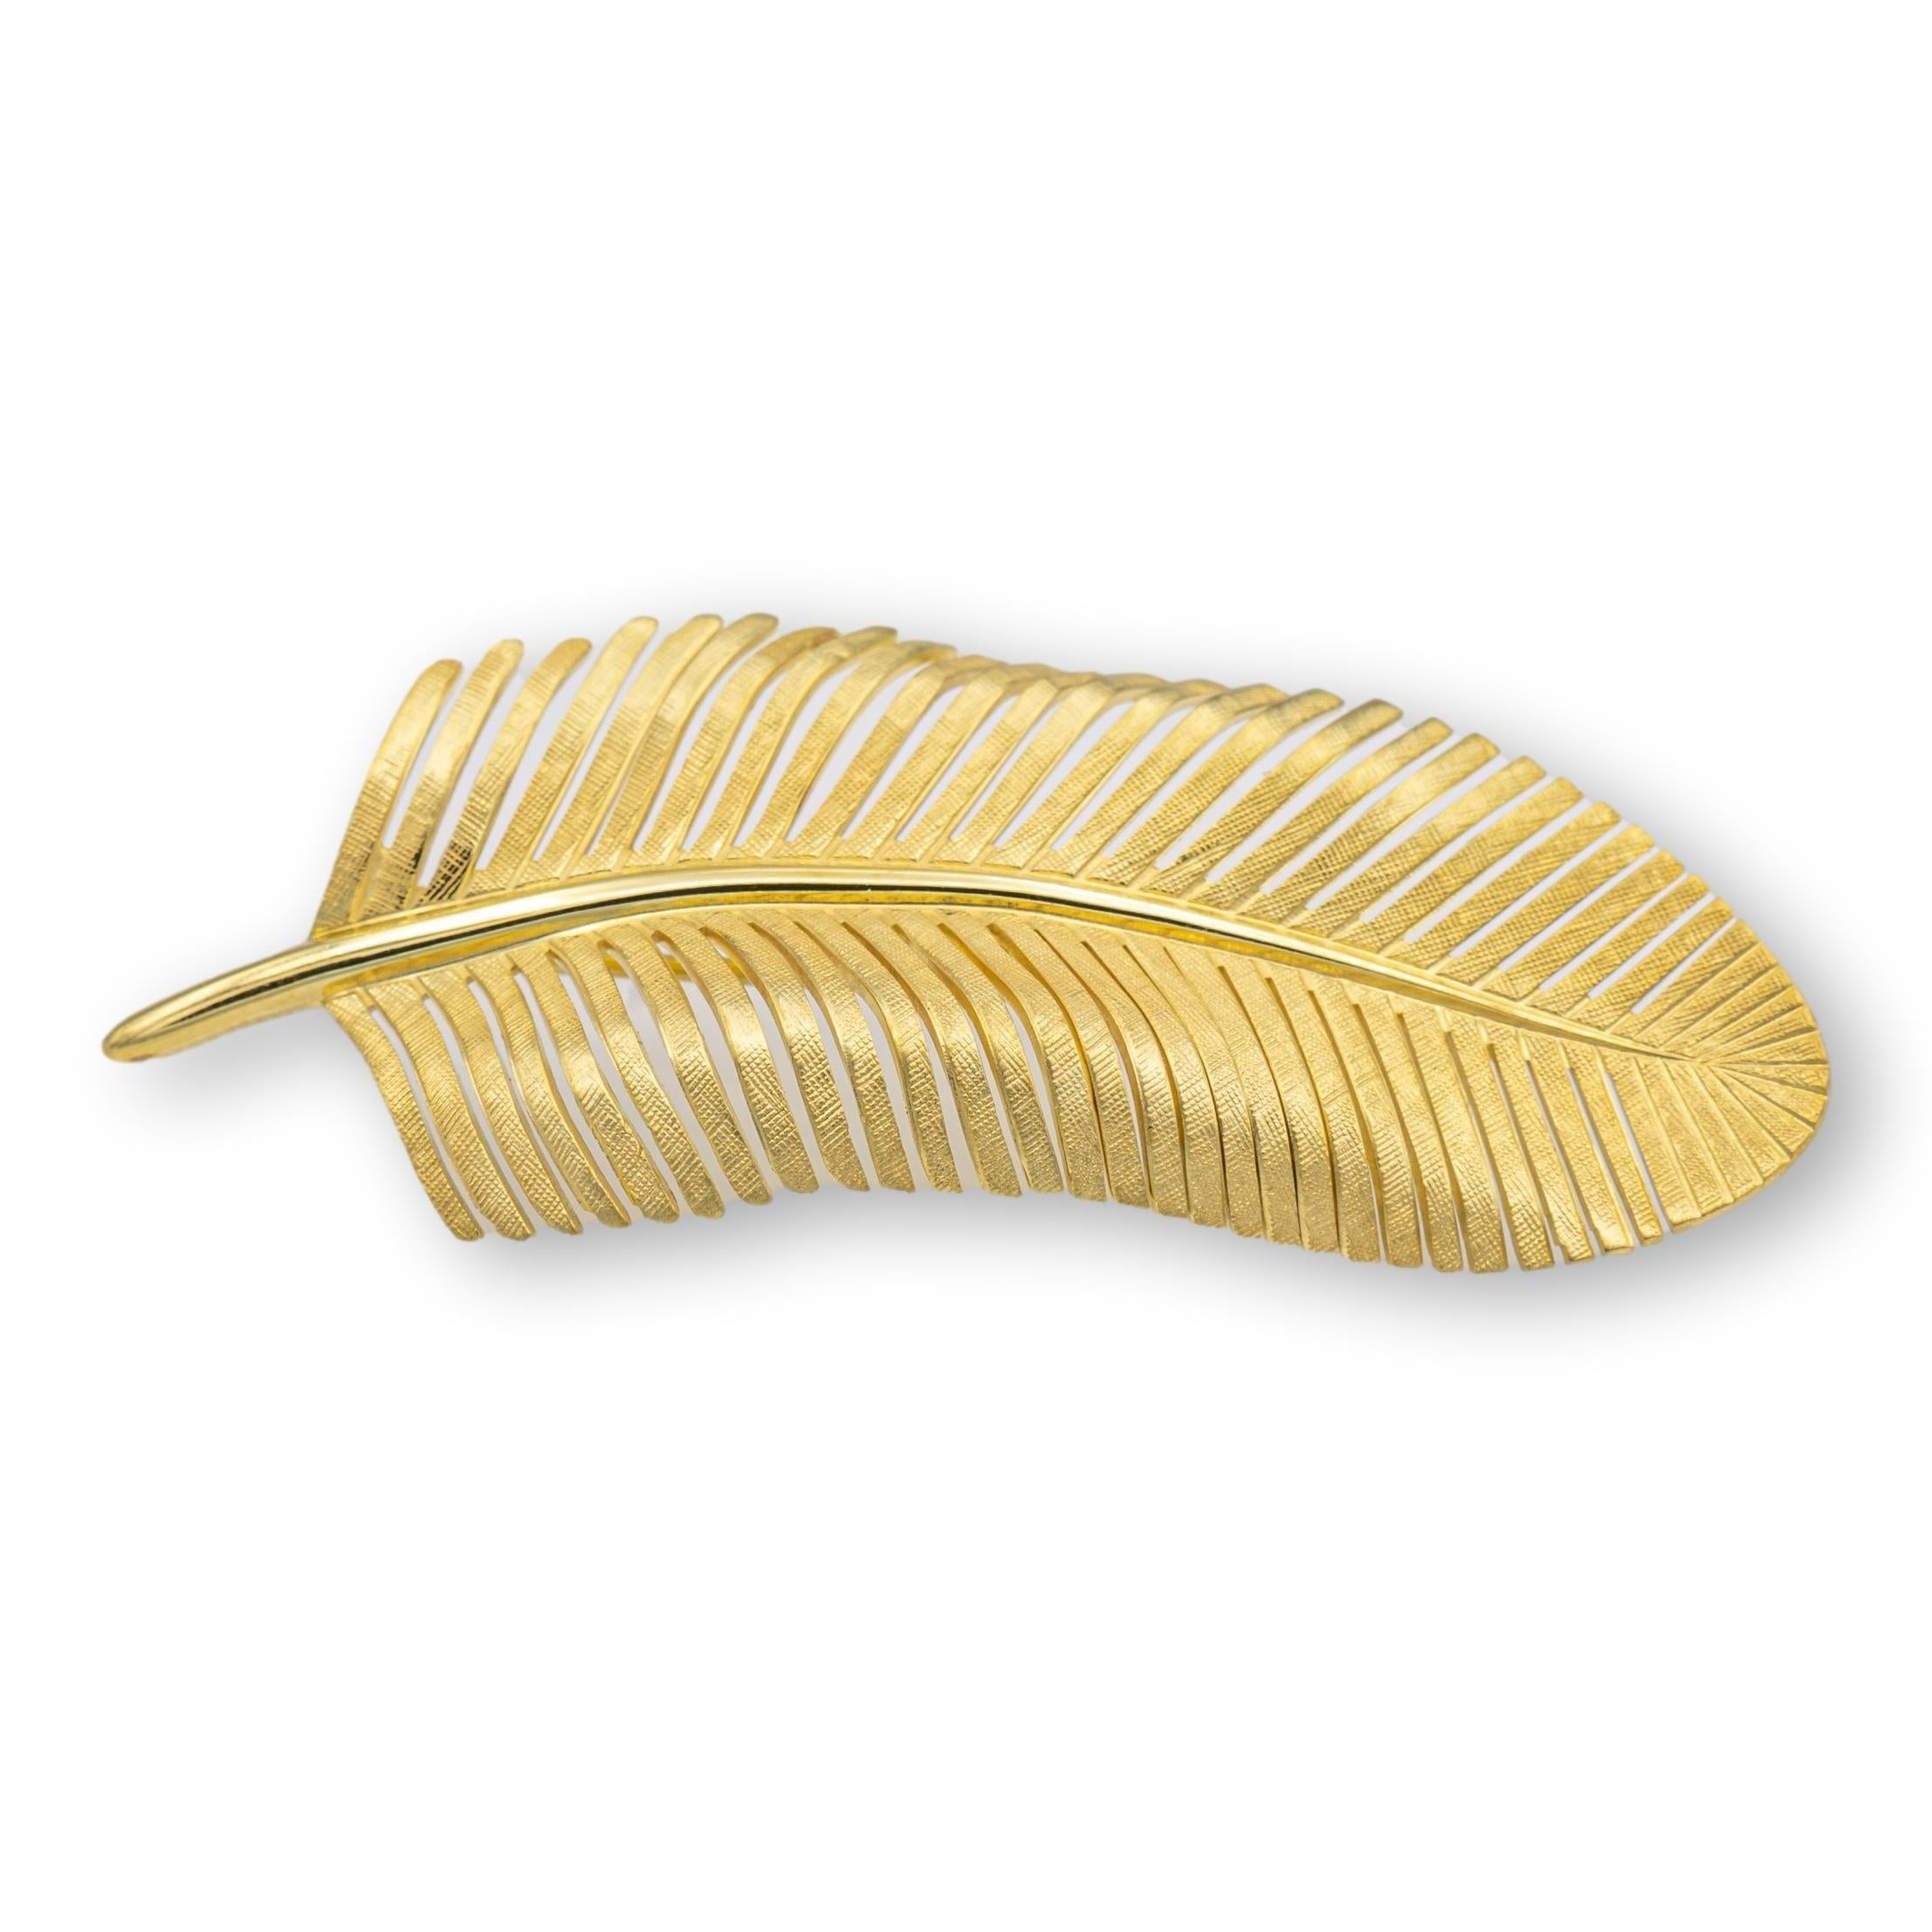 Vintage Tiffany & Co. leaf brooch finely crafted in 14 karat yellow gold with a textured florentine finish and high polished back. The brooch has a stickpin closure and measures 2.5